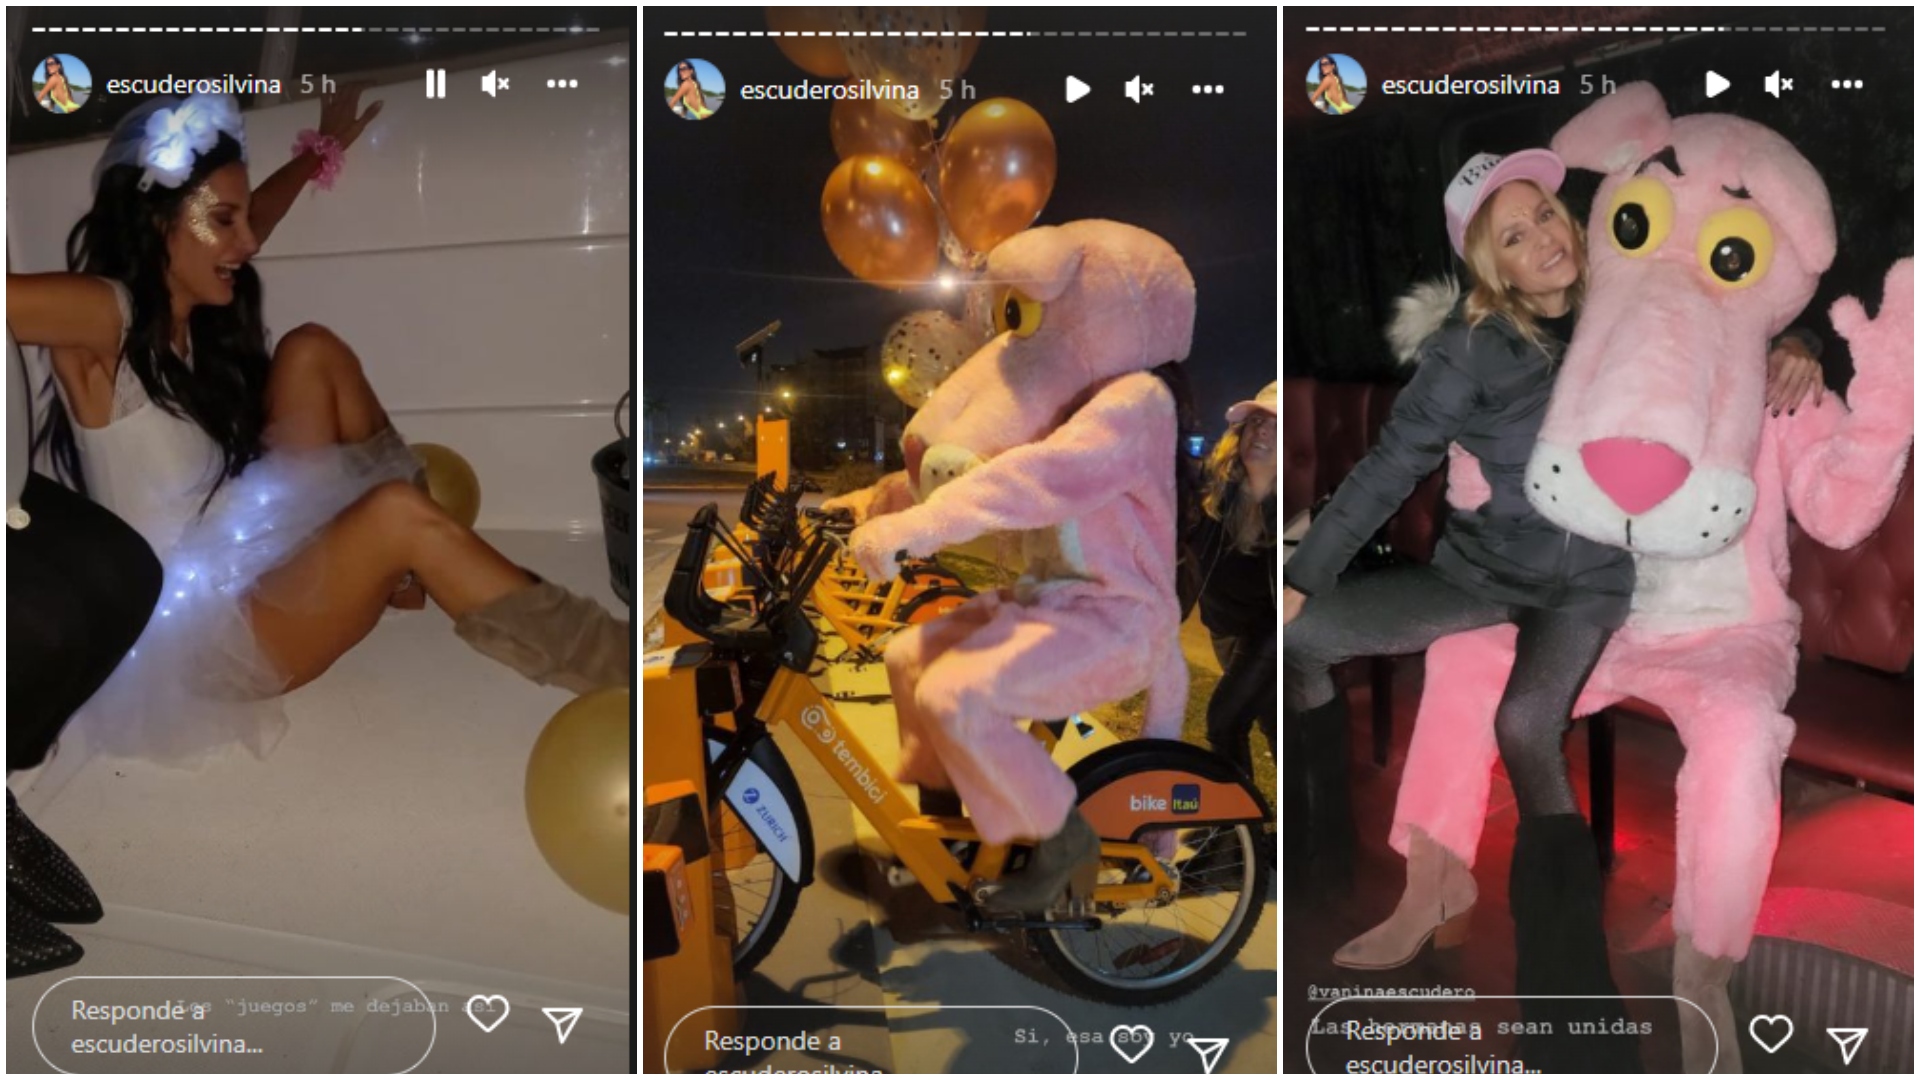 Silvina Escudero dressed up as a sexy Pink Panther bride for her bachelorette party